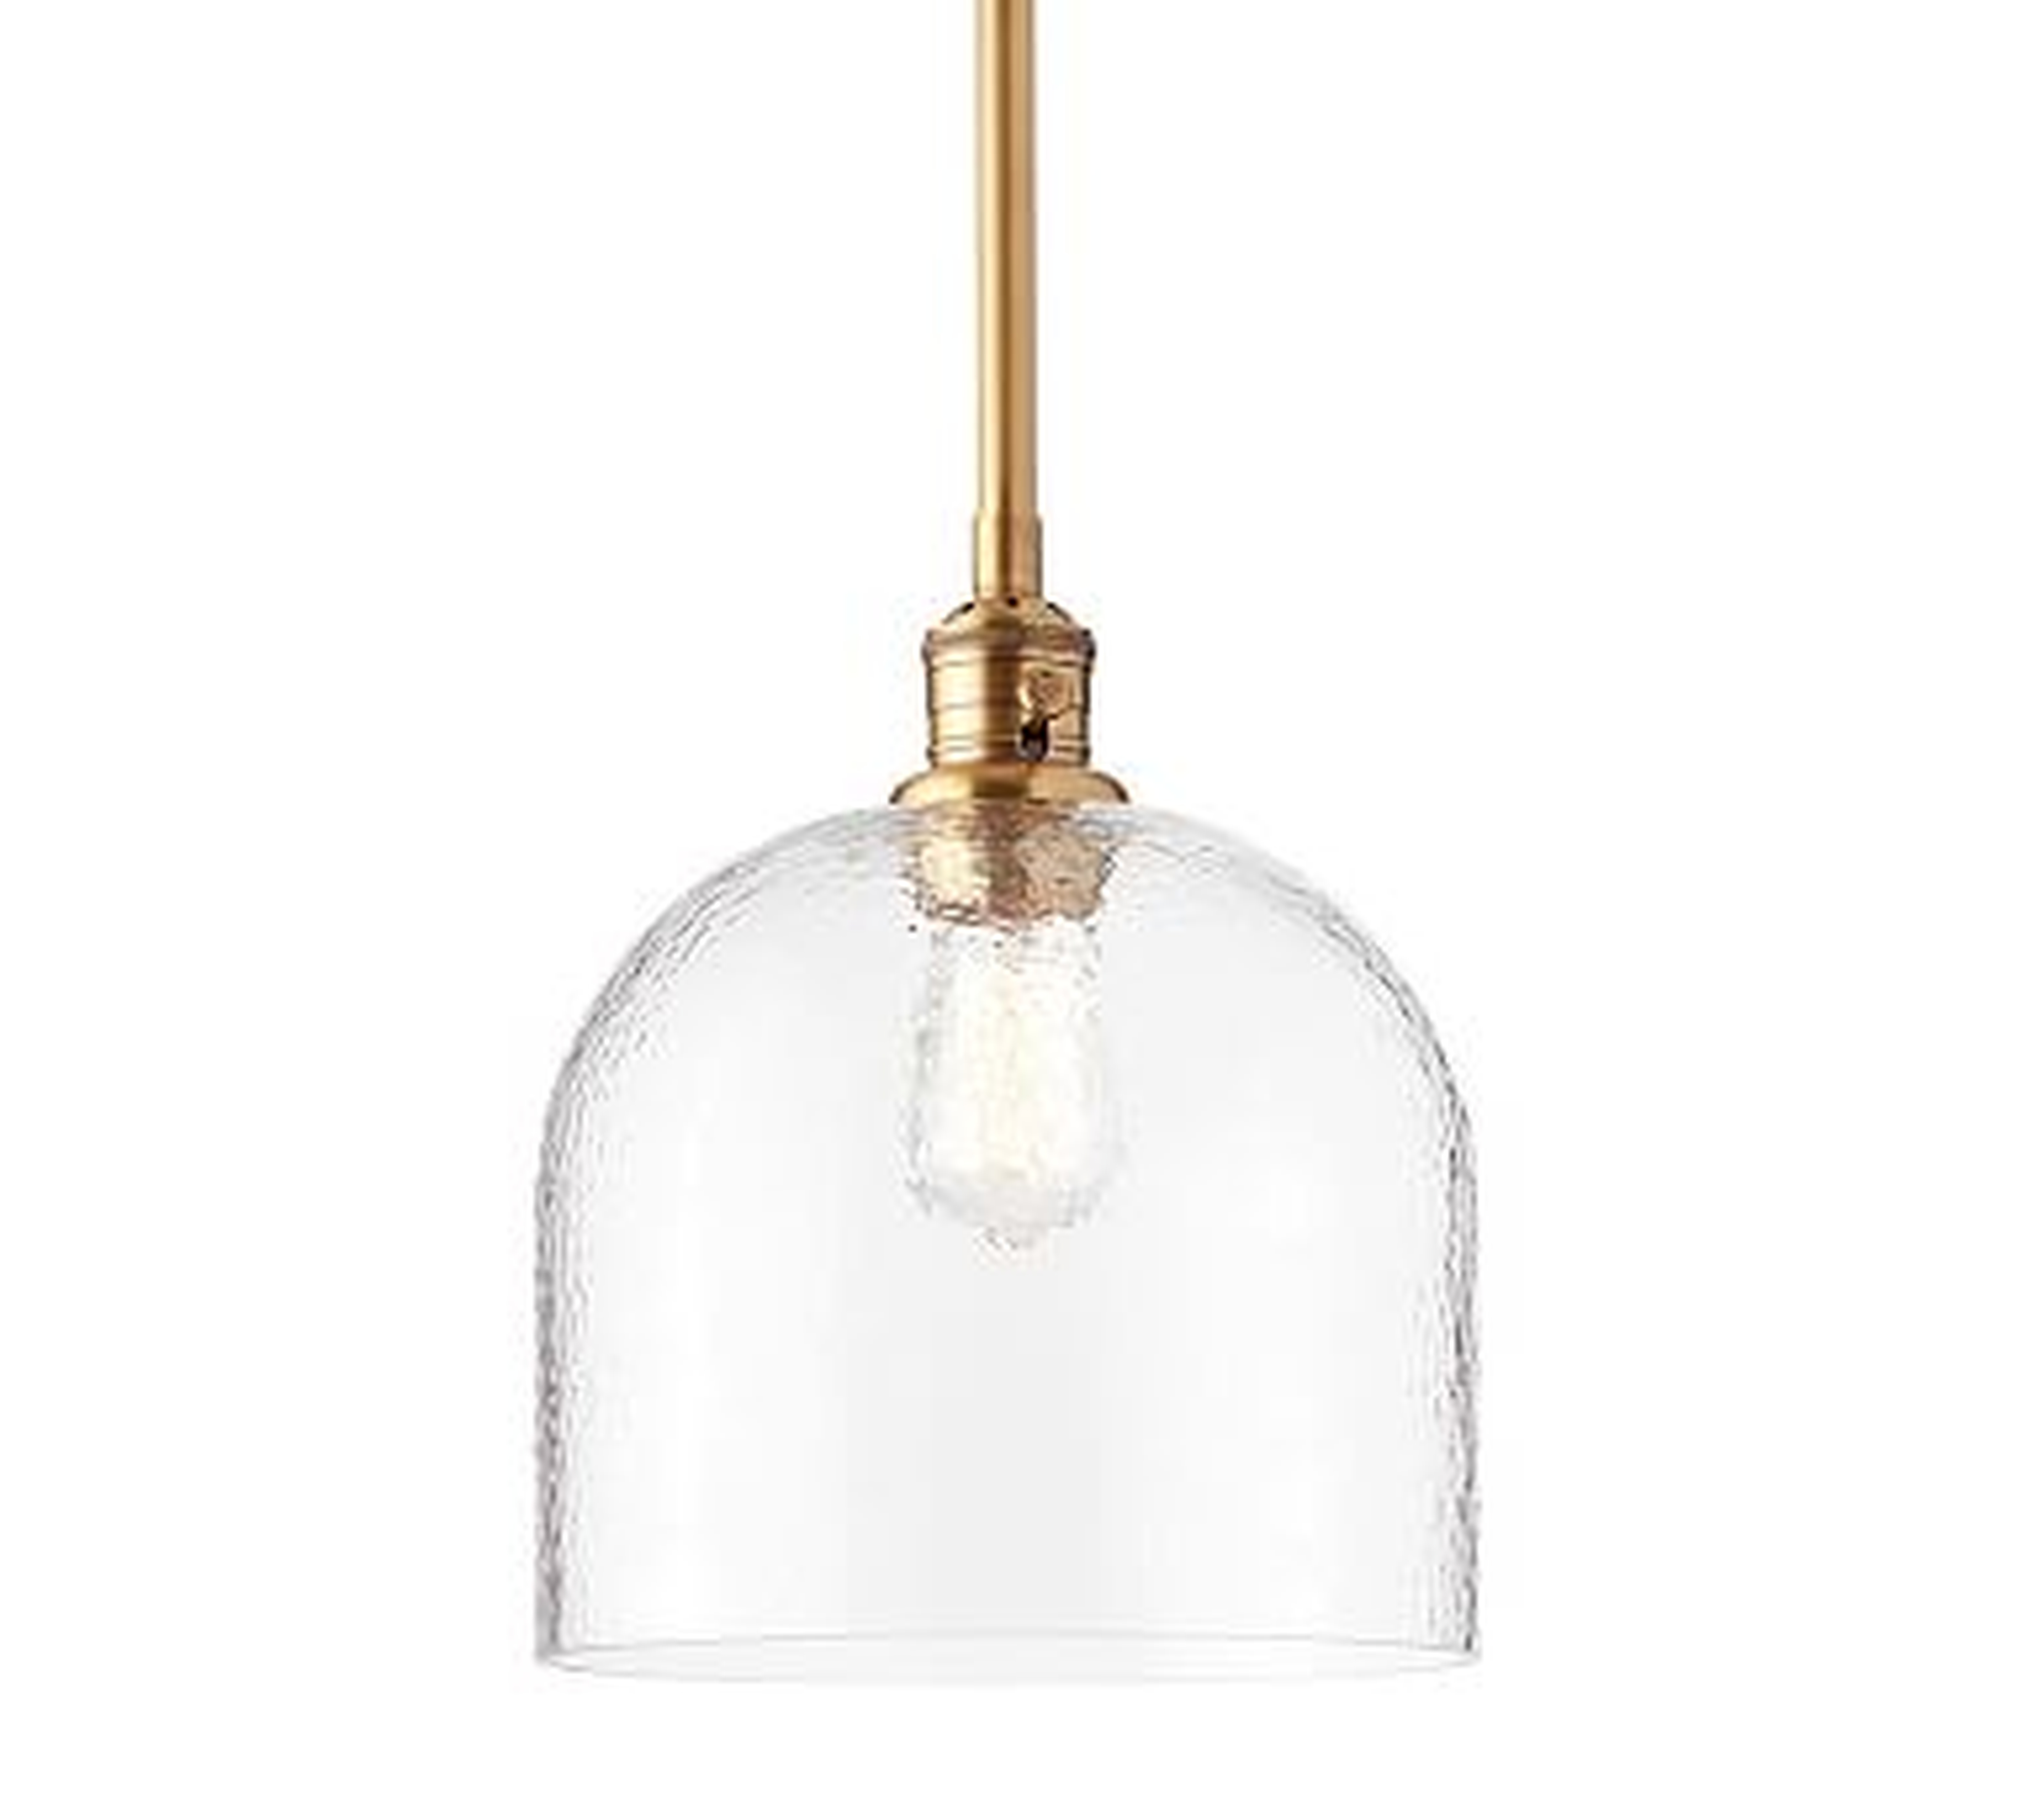 Textured Glass Pole Pendant with Brass Hardware, Large - Pottery Barn